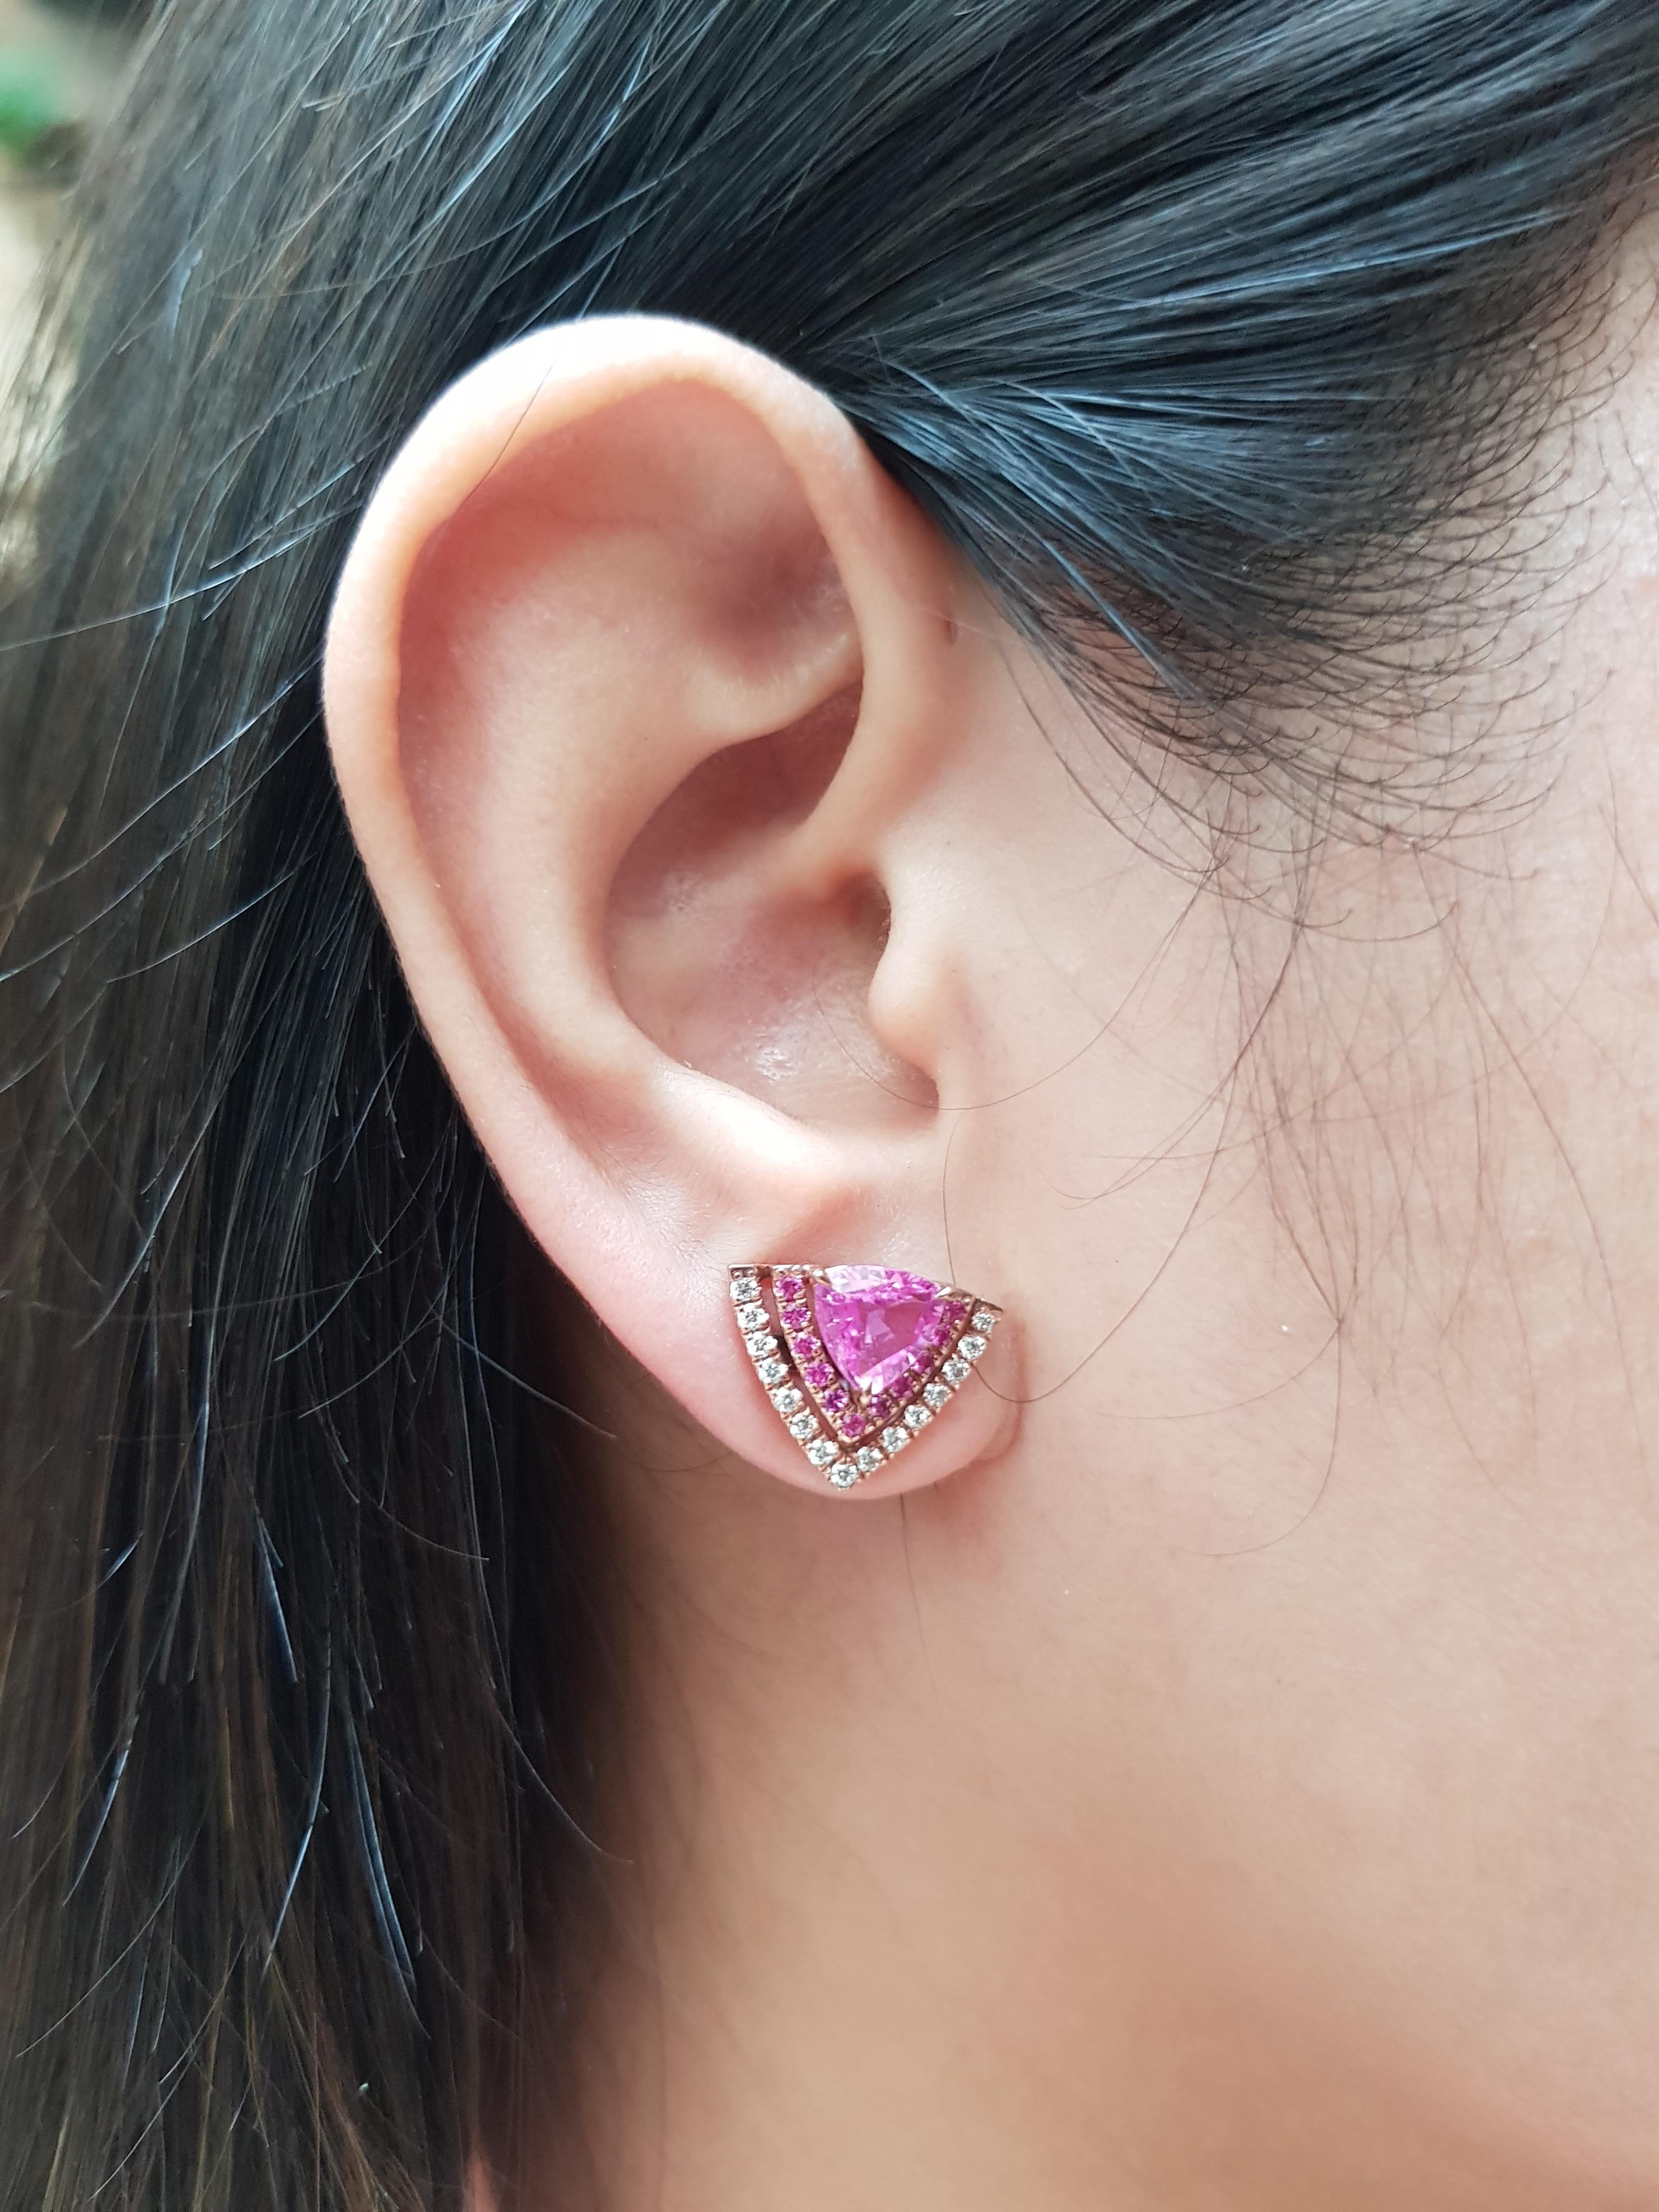 Pink Sapphire 2.54 carats with Pink Sapphire 0.26 carat and Diamond 0.32 carat Earrings set in 18 Karat Rose Gold Settings

Width: 1.6 cm
Length: 1.4 cm 

